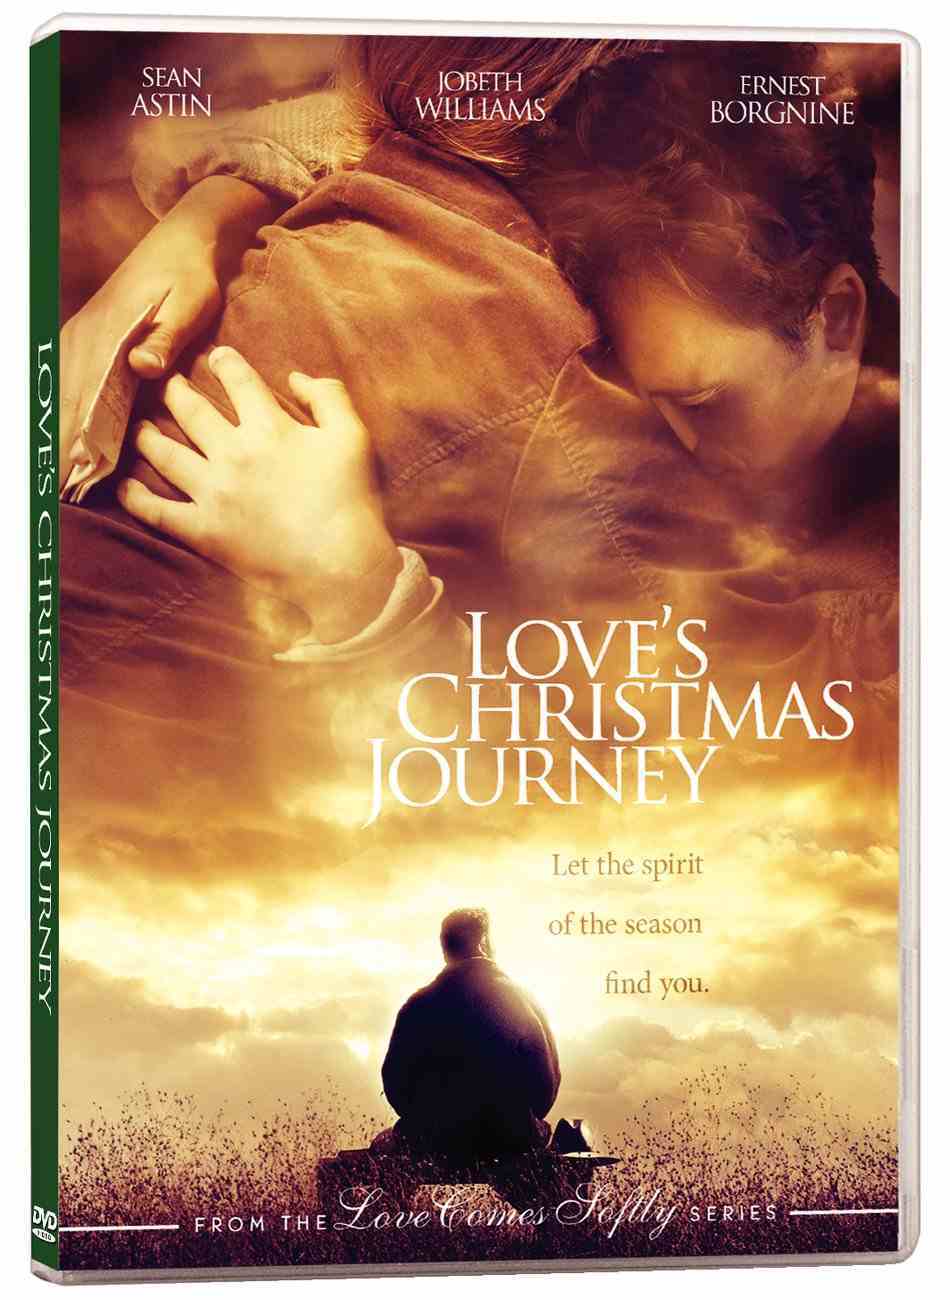 Love's Christmas Journey (Love Comes Softly Series) DVD